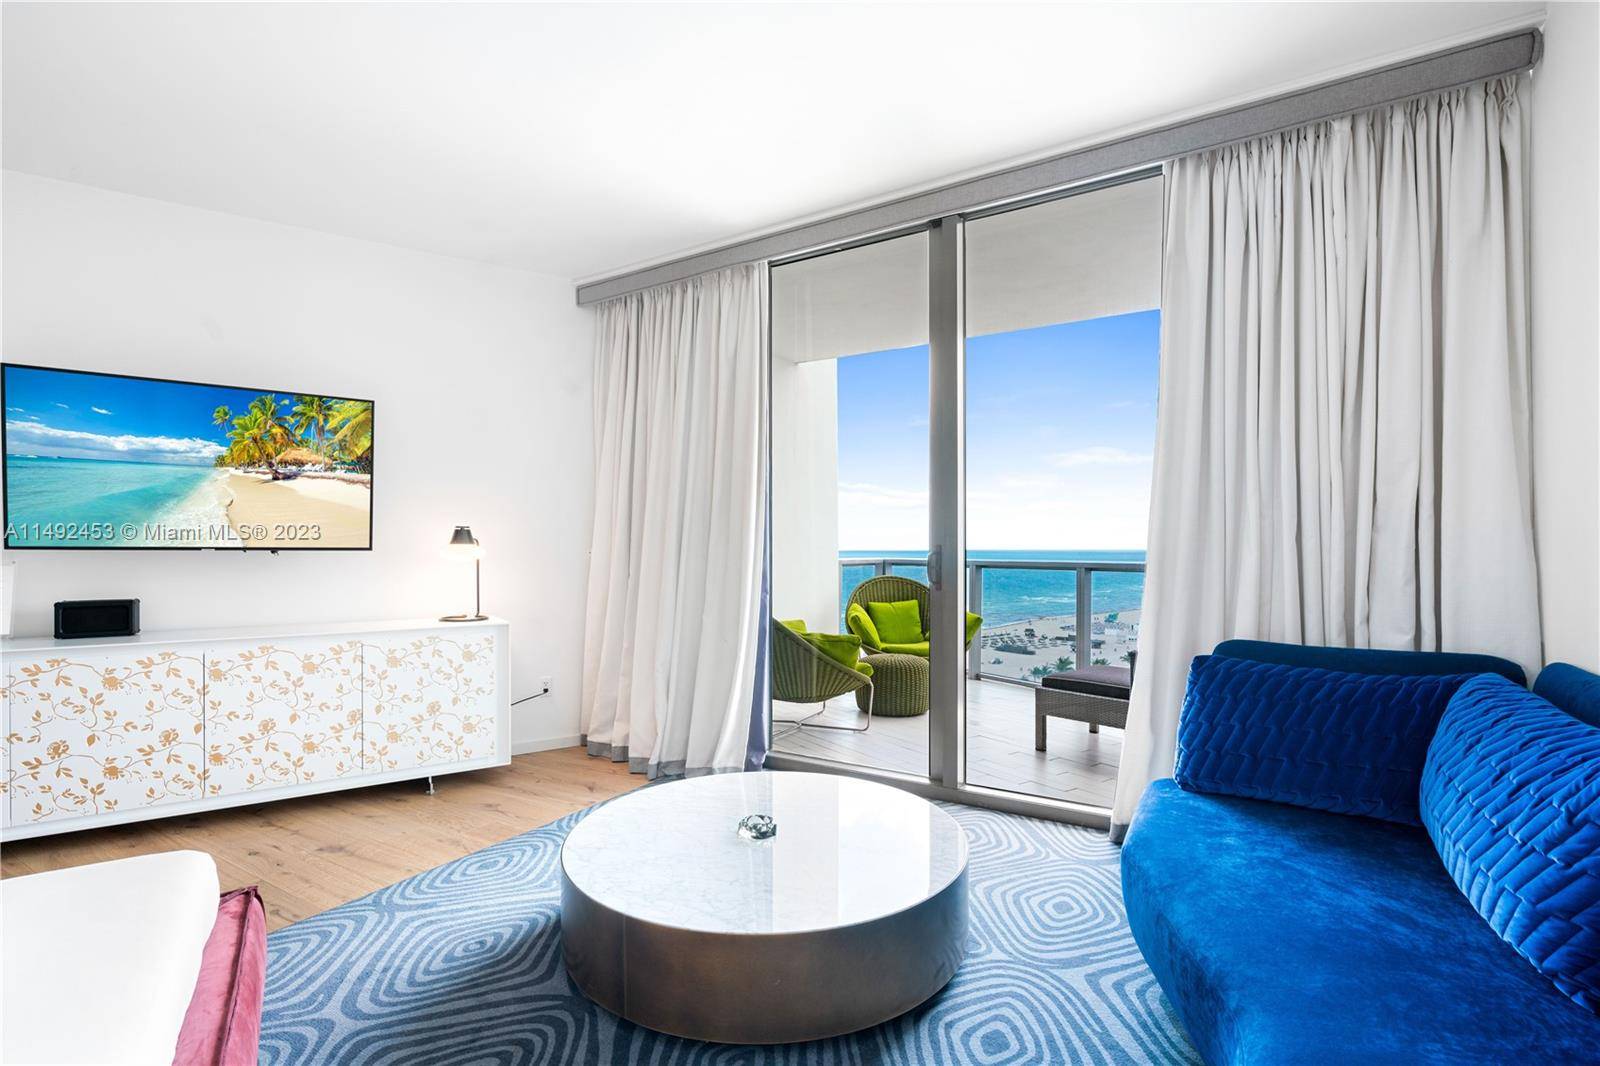 This south beach private residence at the W Hotel allows you to enjoy a waterfront location, footsteps from the beautiful white sand beach.